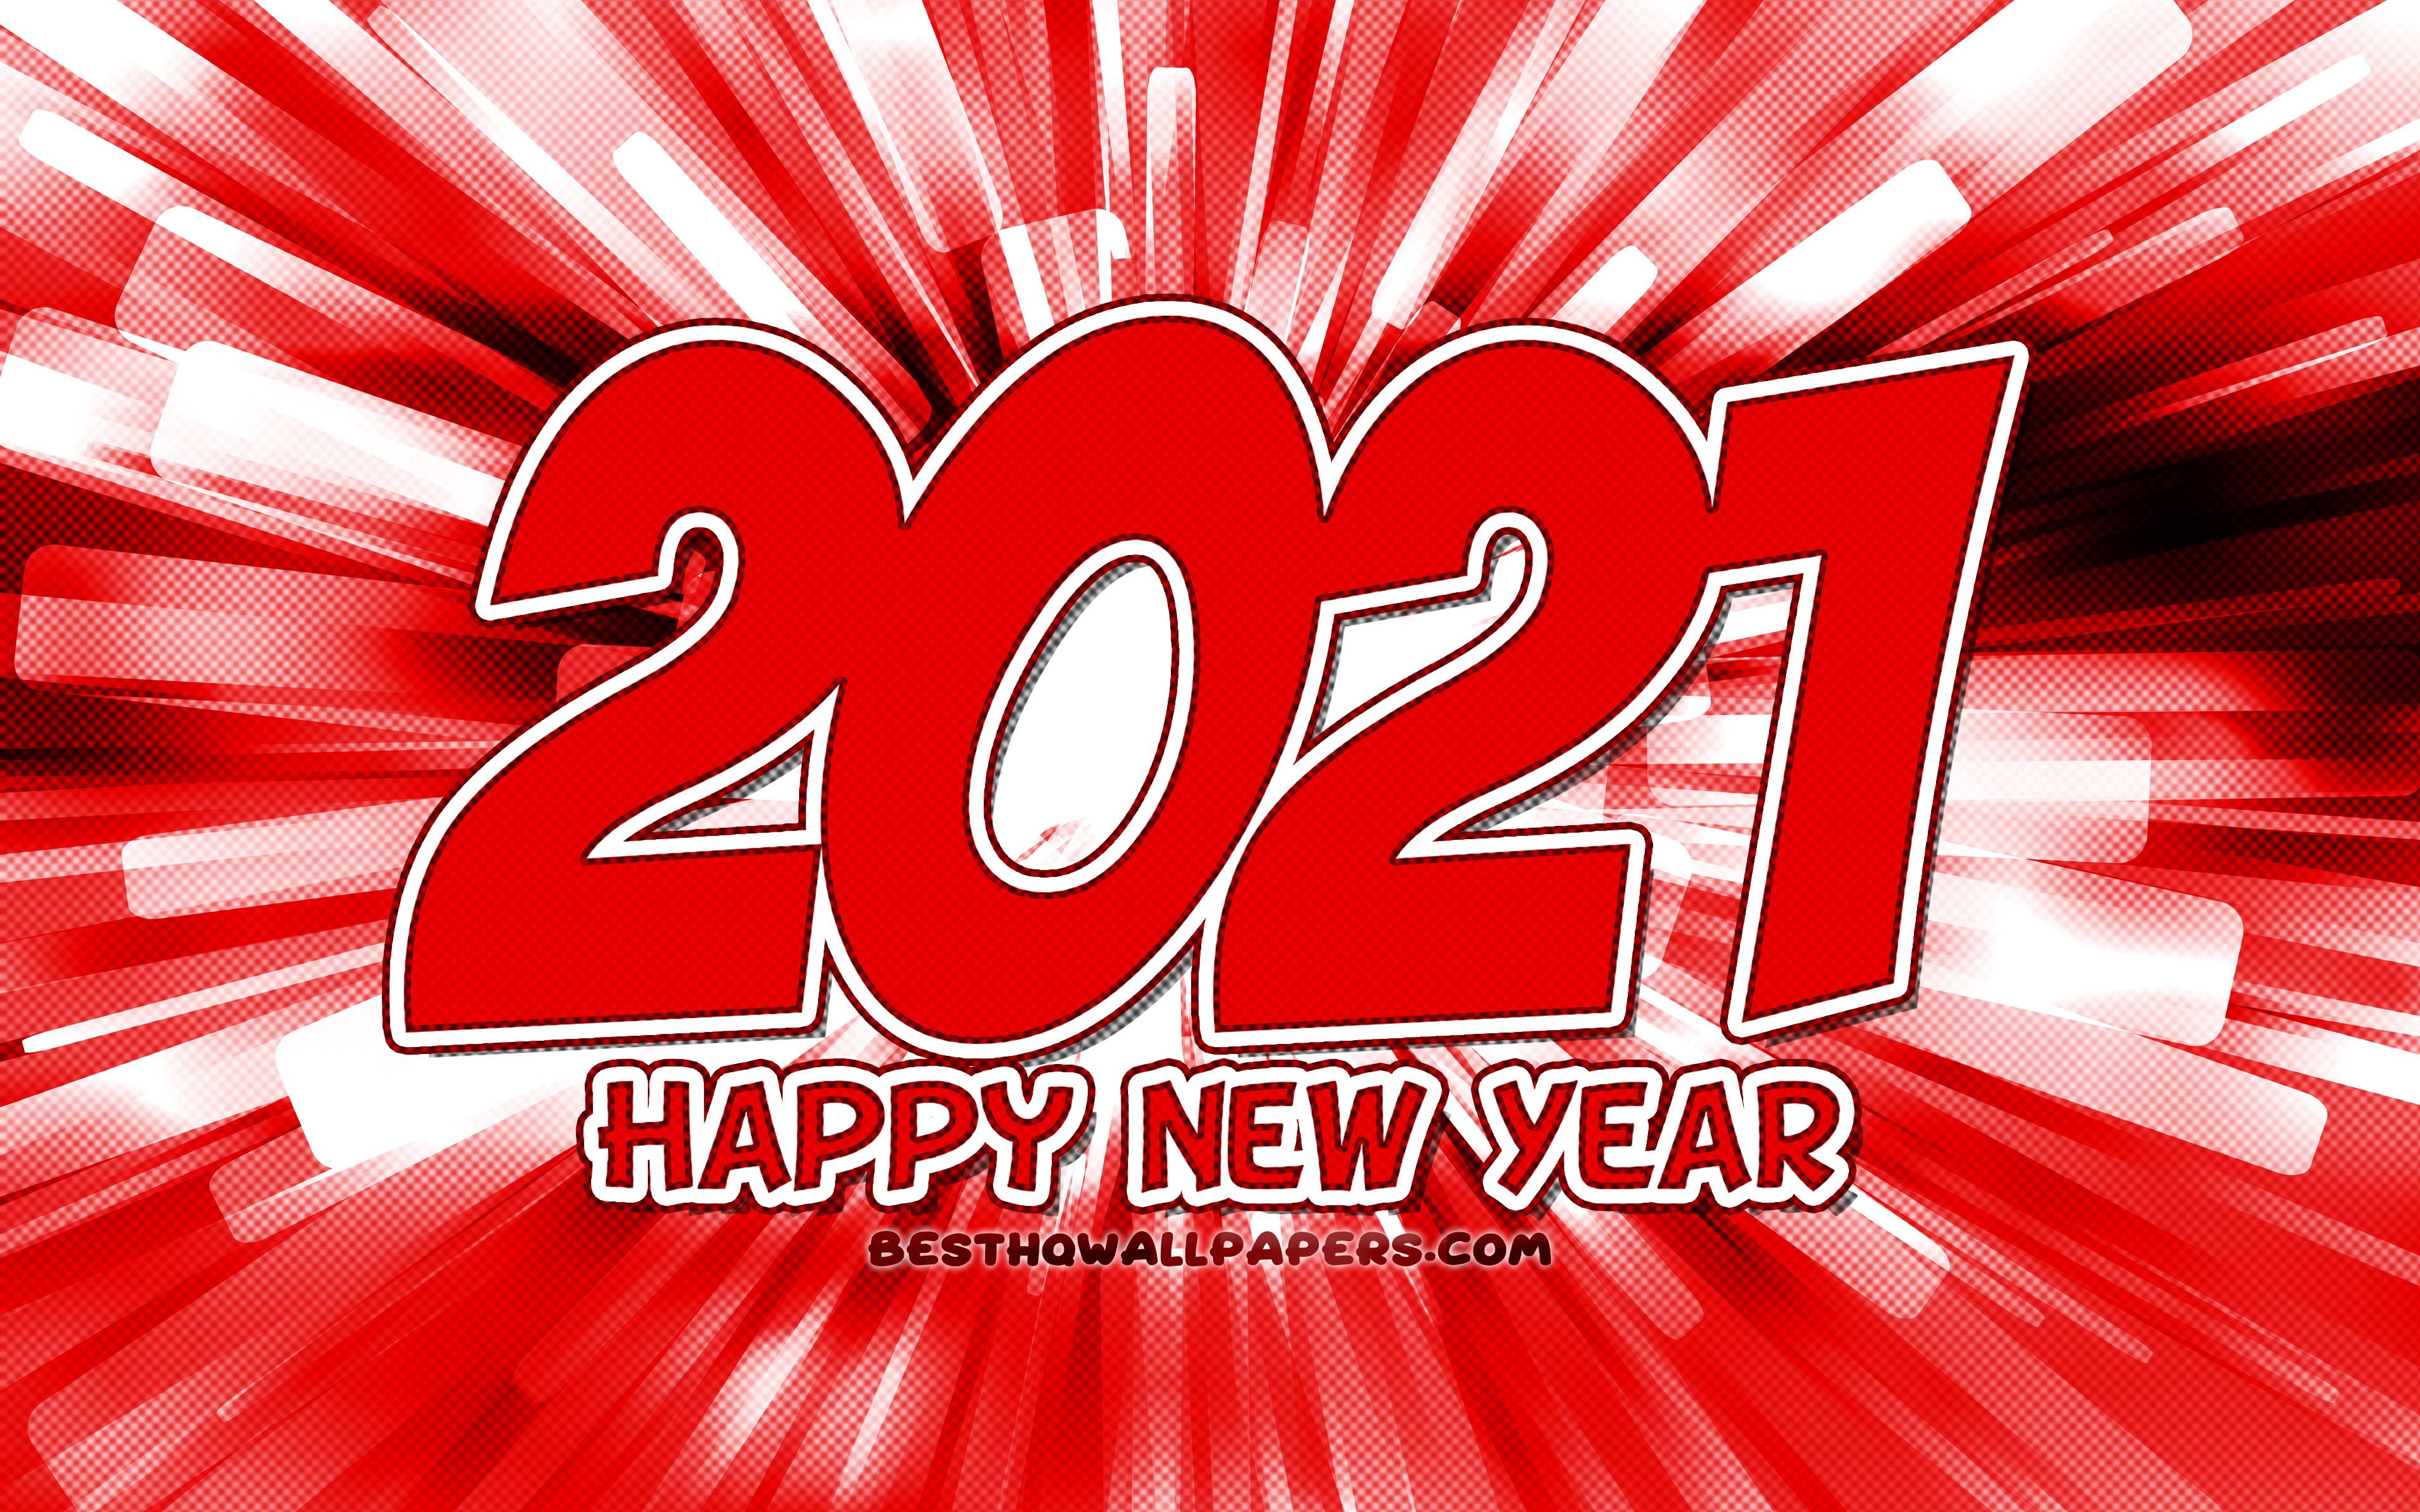 3840x2400 Download Wallpaper Happy New Year 2022 4k Red Abstract Rays 2022 Red Digits 2022 Concepts 2022 On Red Background 2022 Year Digits For Desktop With Resolution 3840x2400 High Quality Hd Picture Wallpaper